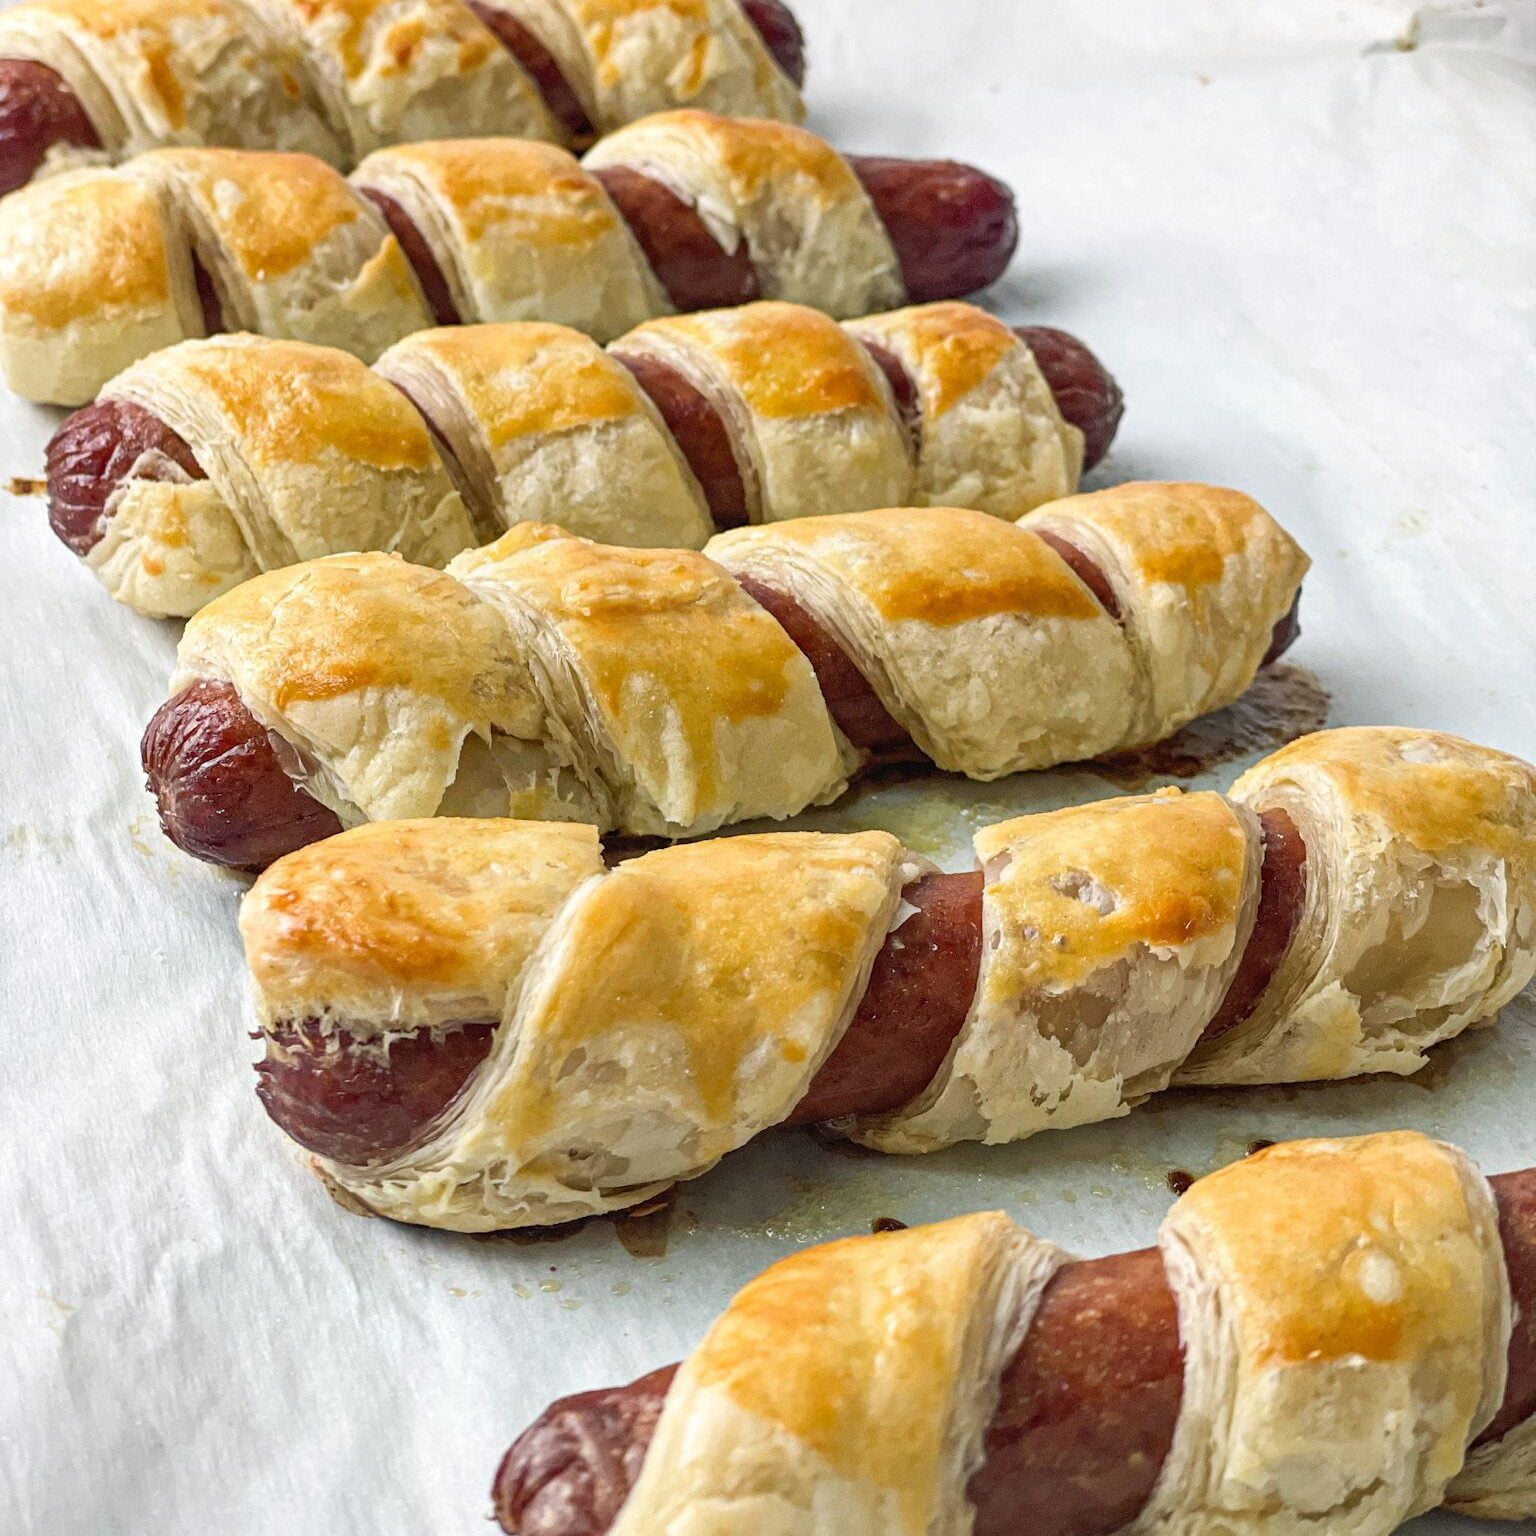 https://tastegreatfoodie.com/wp-content/uploads/2022/06/puff-pastry-hot-dogs-e1657728055910.jpg